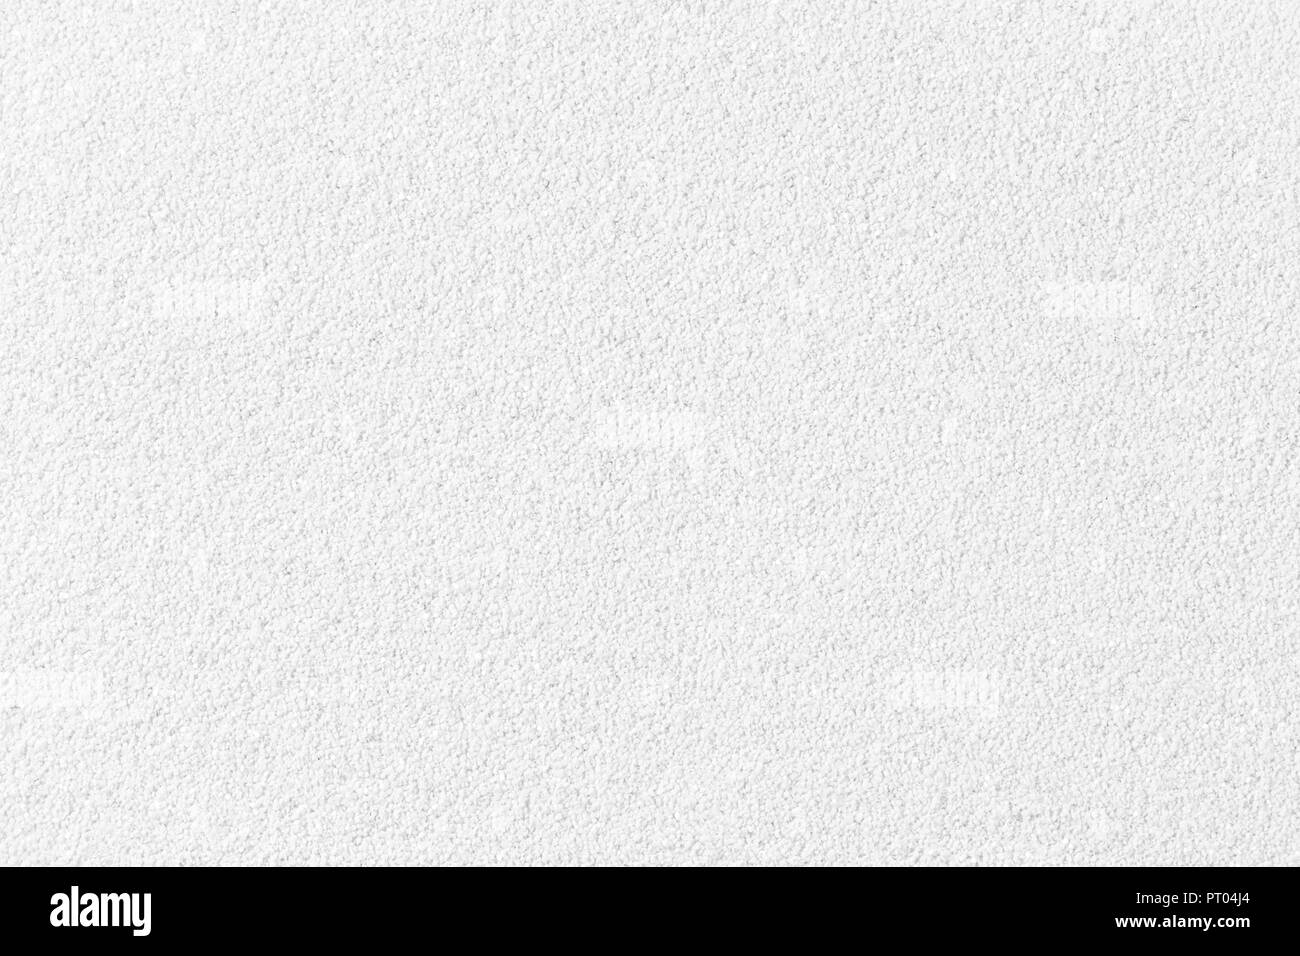 White glitter texture. High quality texture in extremely high resolution. Stock Photo